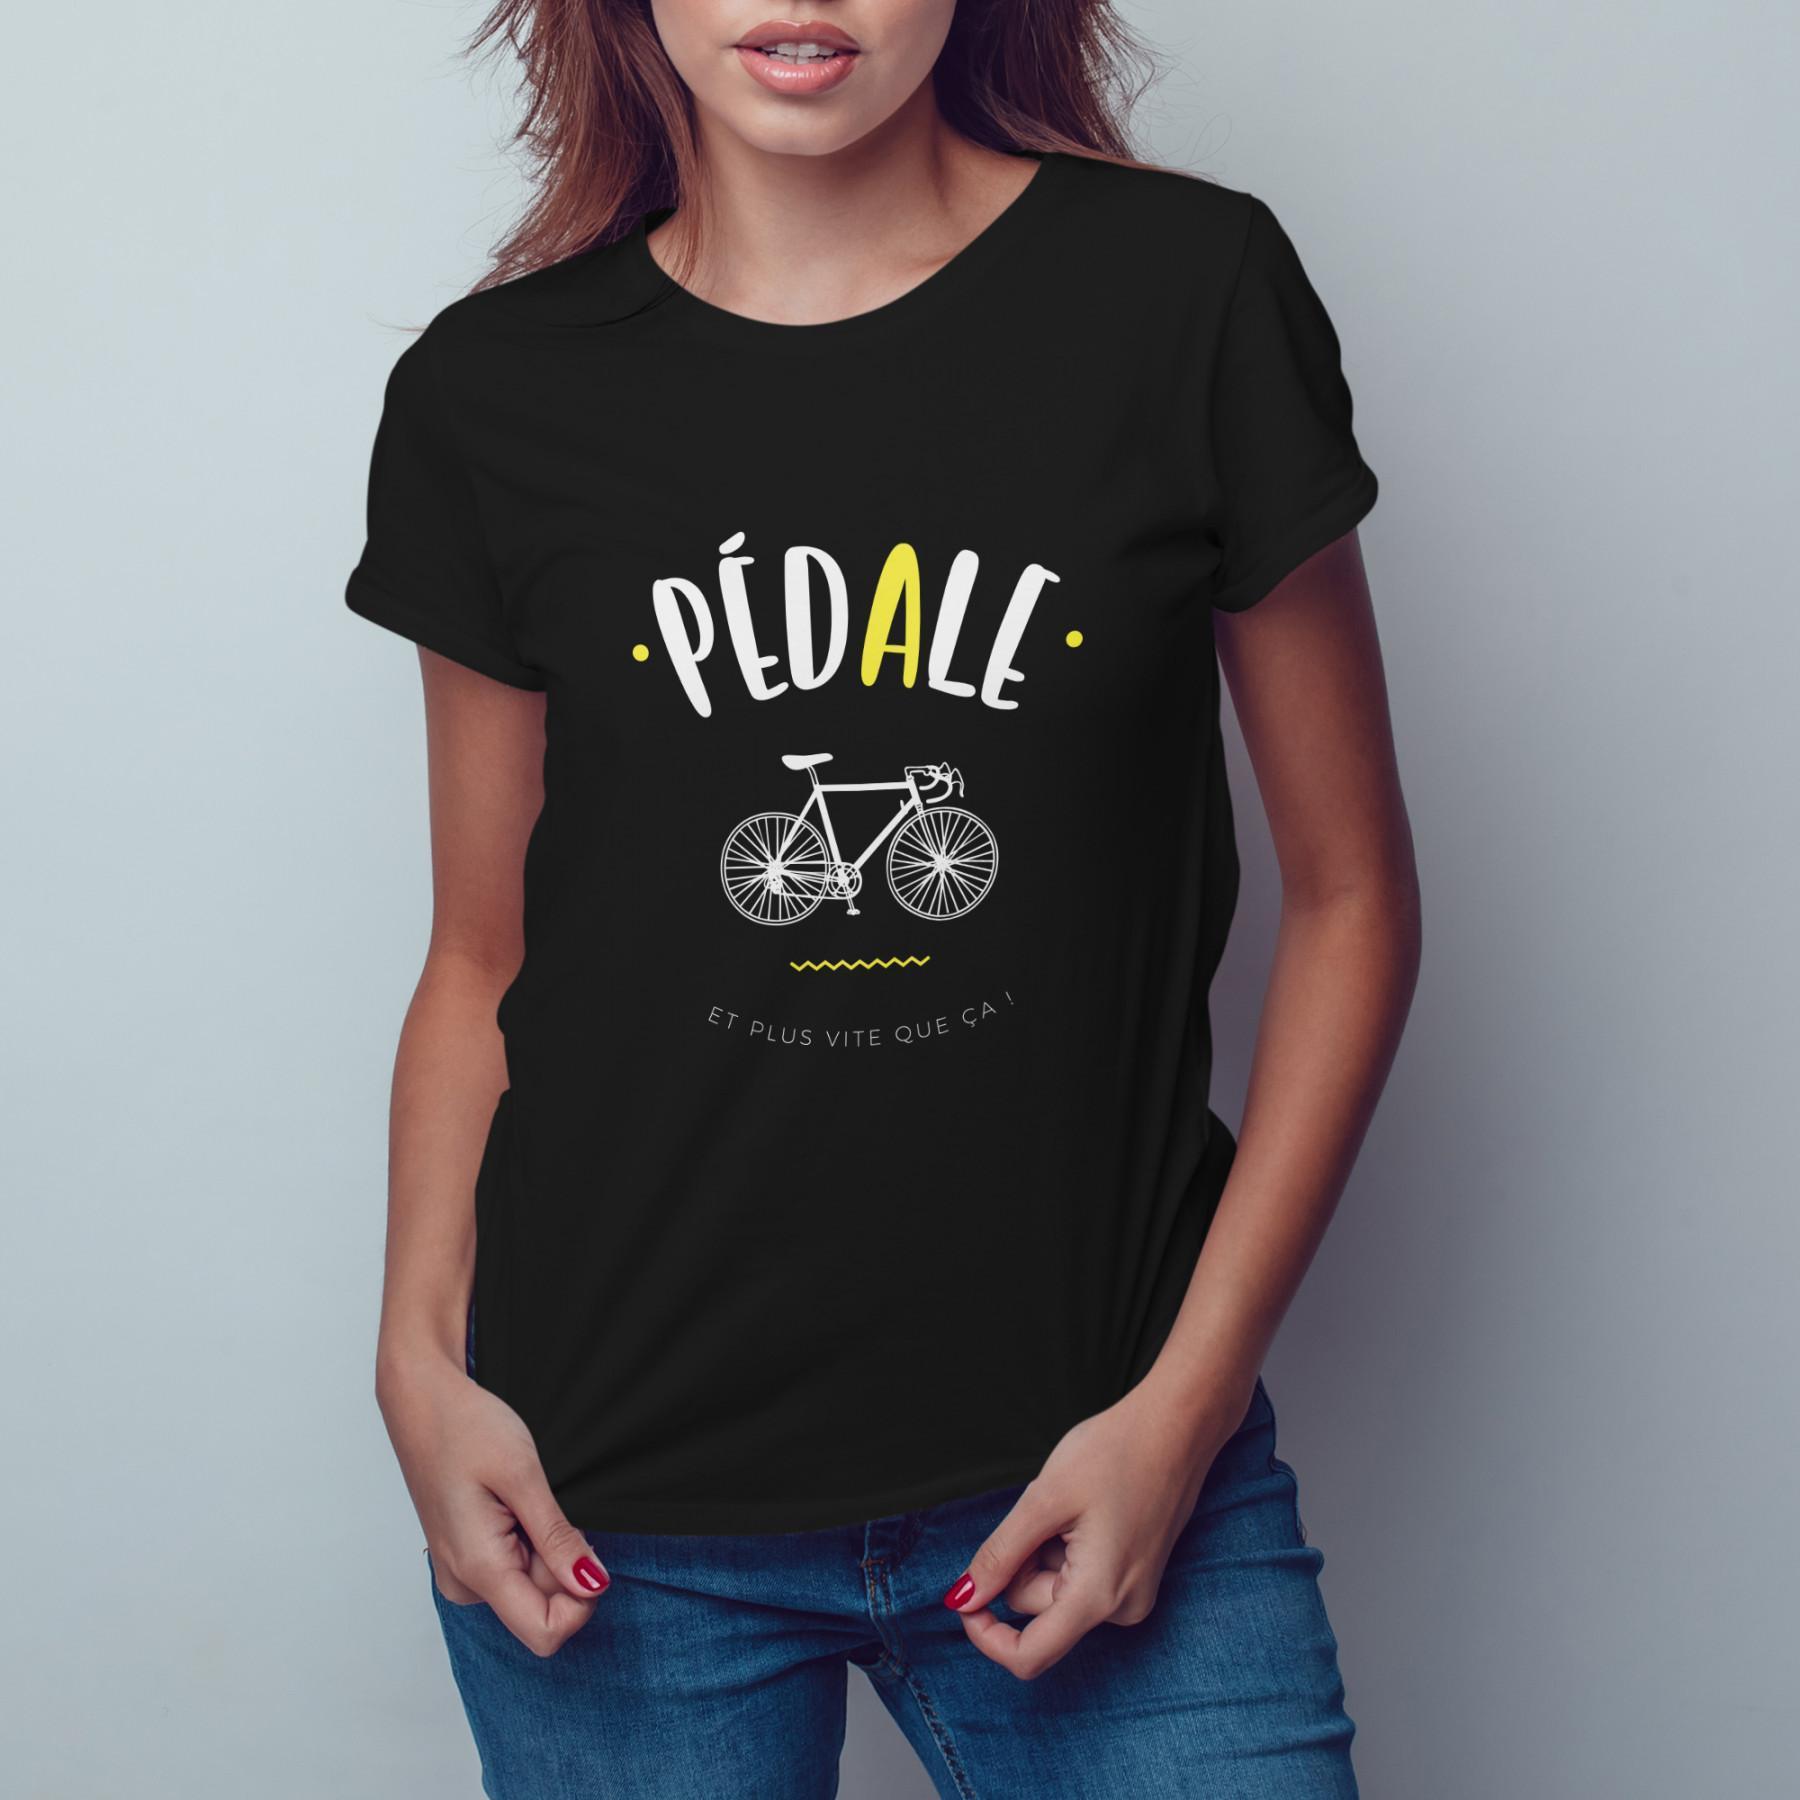 T-shirt vrouw pedaal